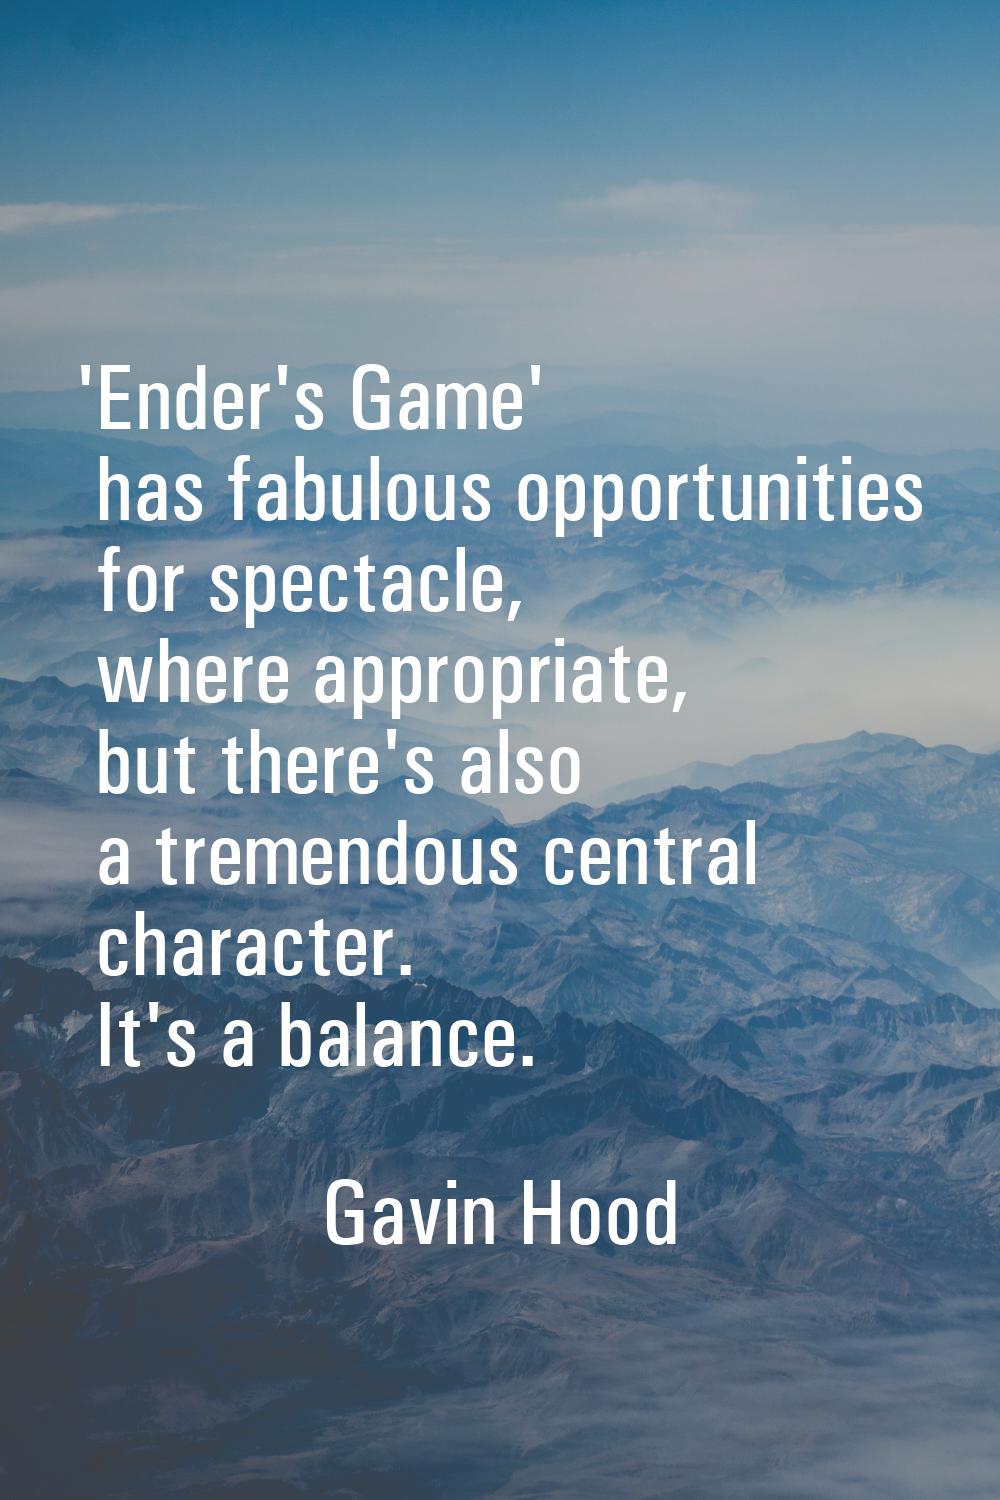 'Ender's Game' has fabulous opportunities for spectacle, where appropriate, but there's also a trem